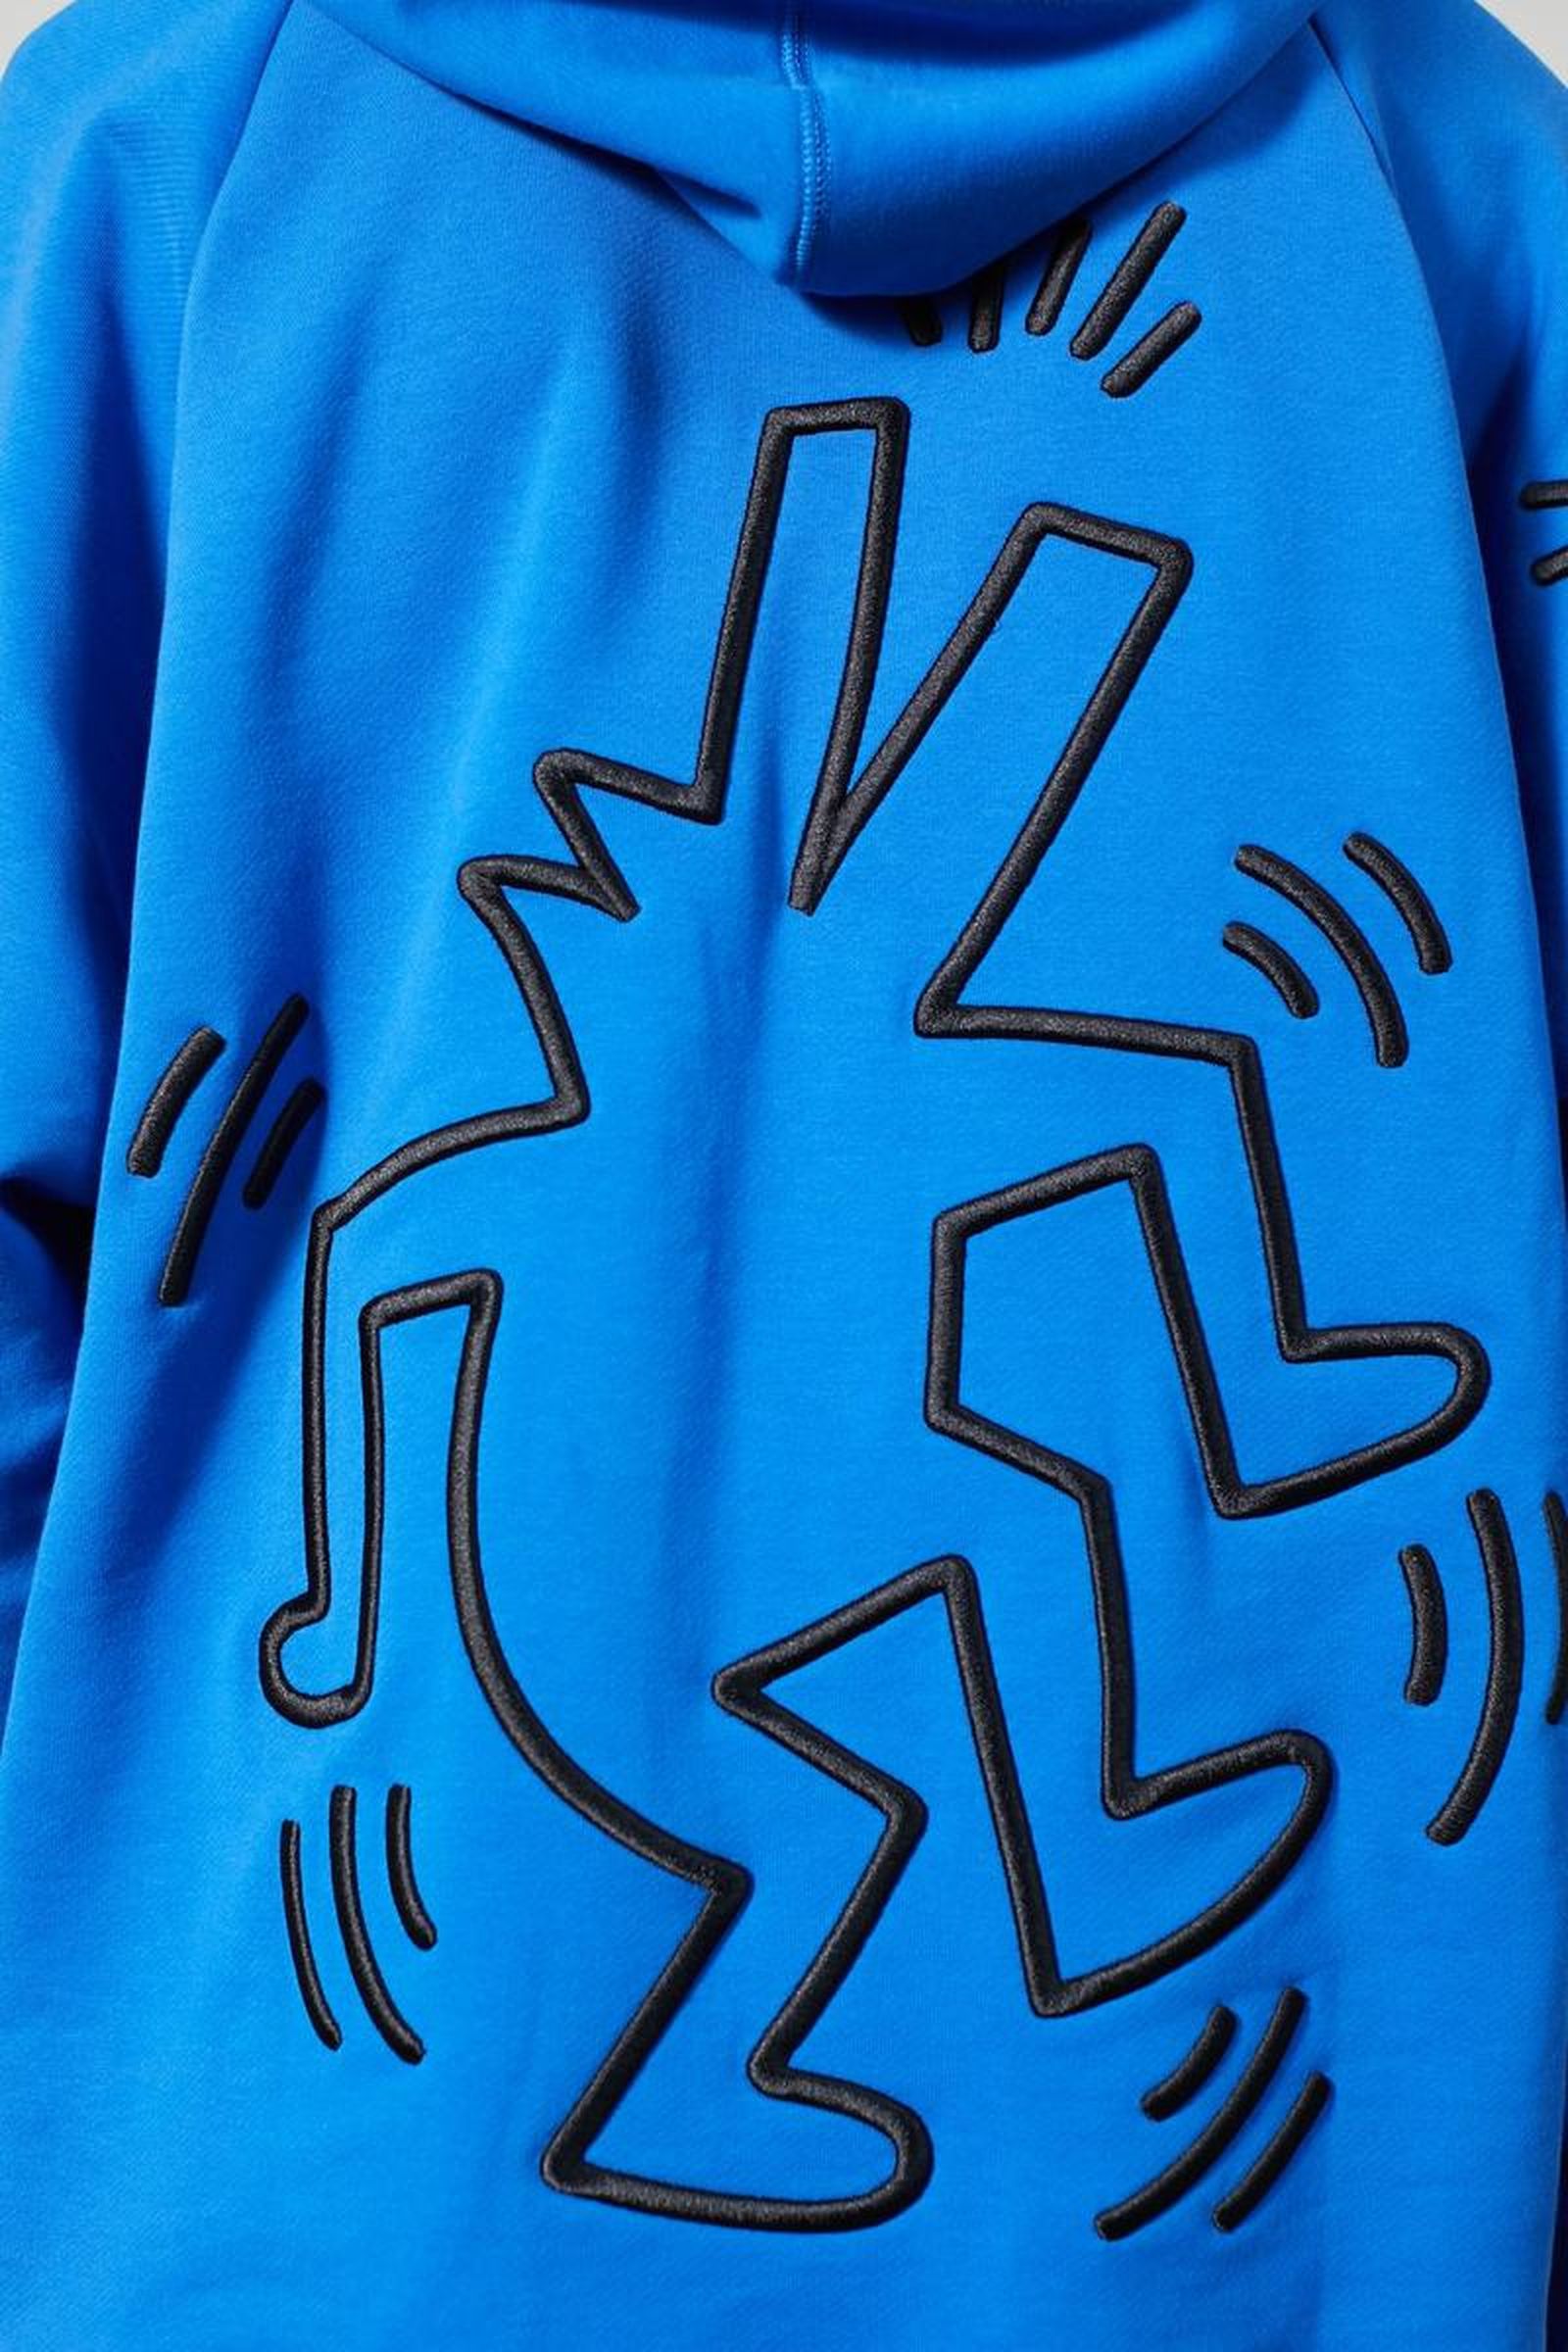 12etudes-keith-haring-ss20-collection